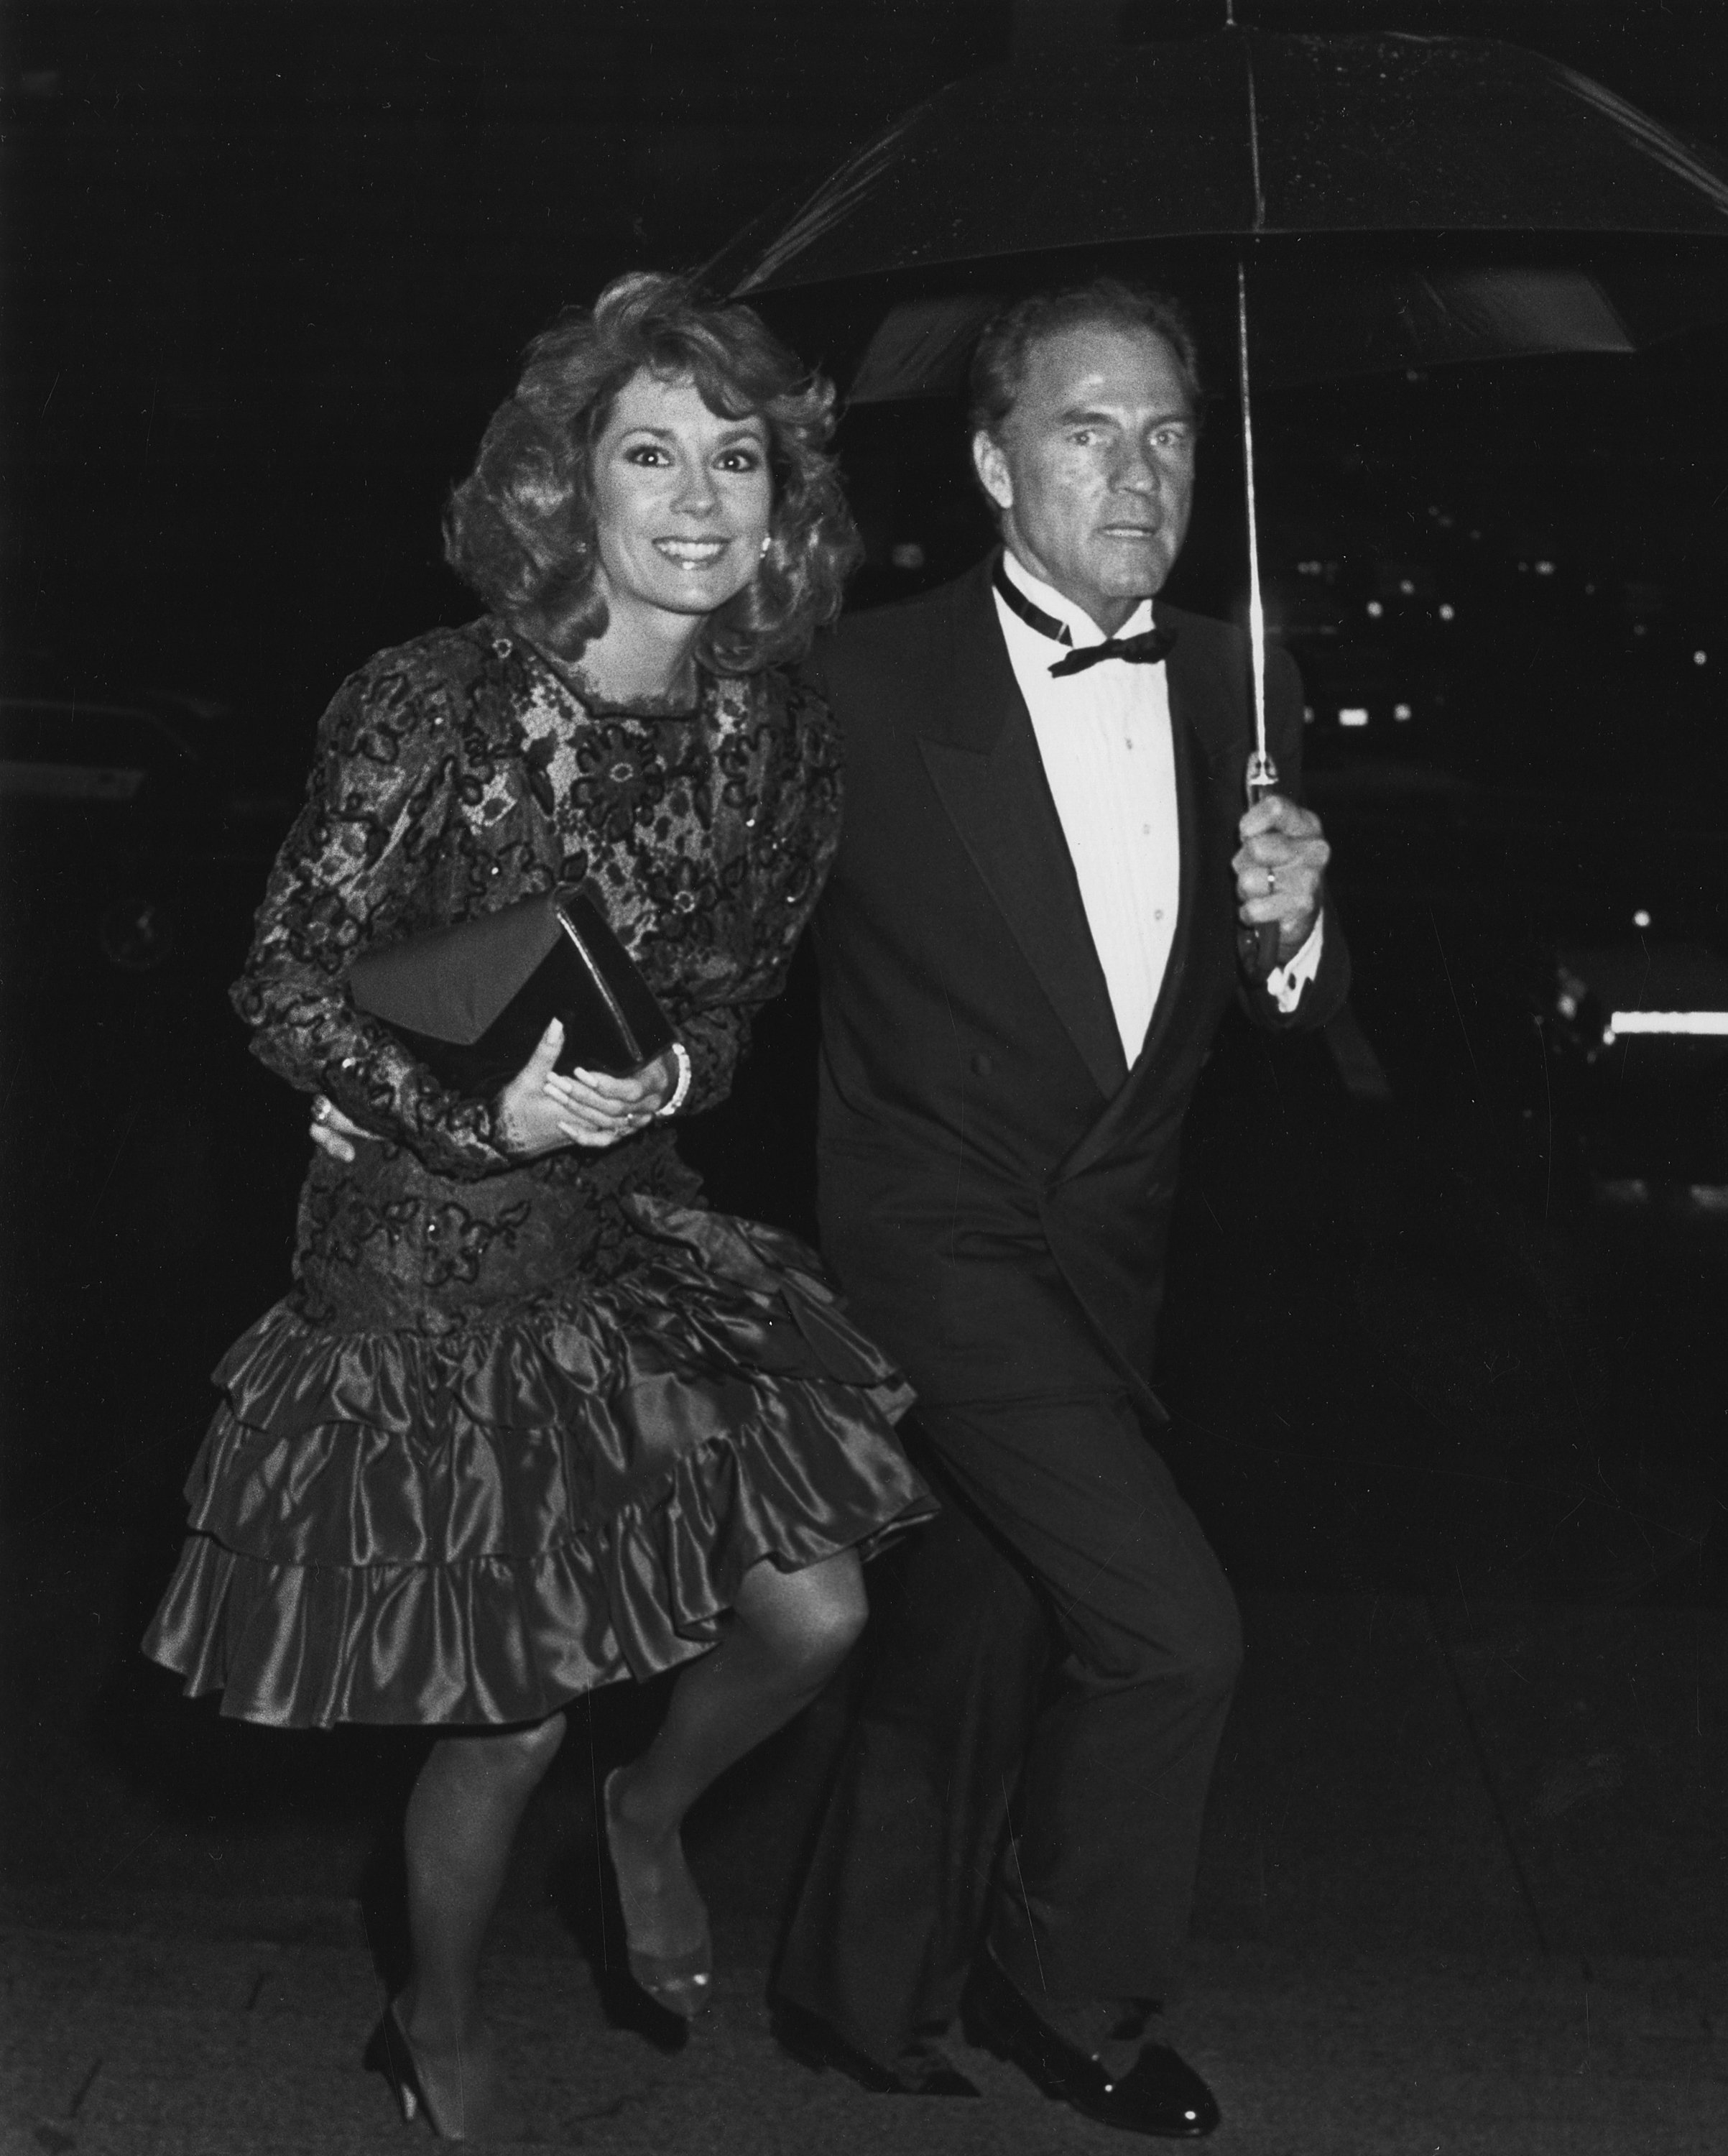 Kathie Lee and Frank Gifford at Laura Steinberg and Jonathan Tisch's wedding on April 18, 1988, in New York City. | Source: Ron Galella/Ron Galella Collection/Getty Images